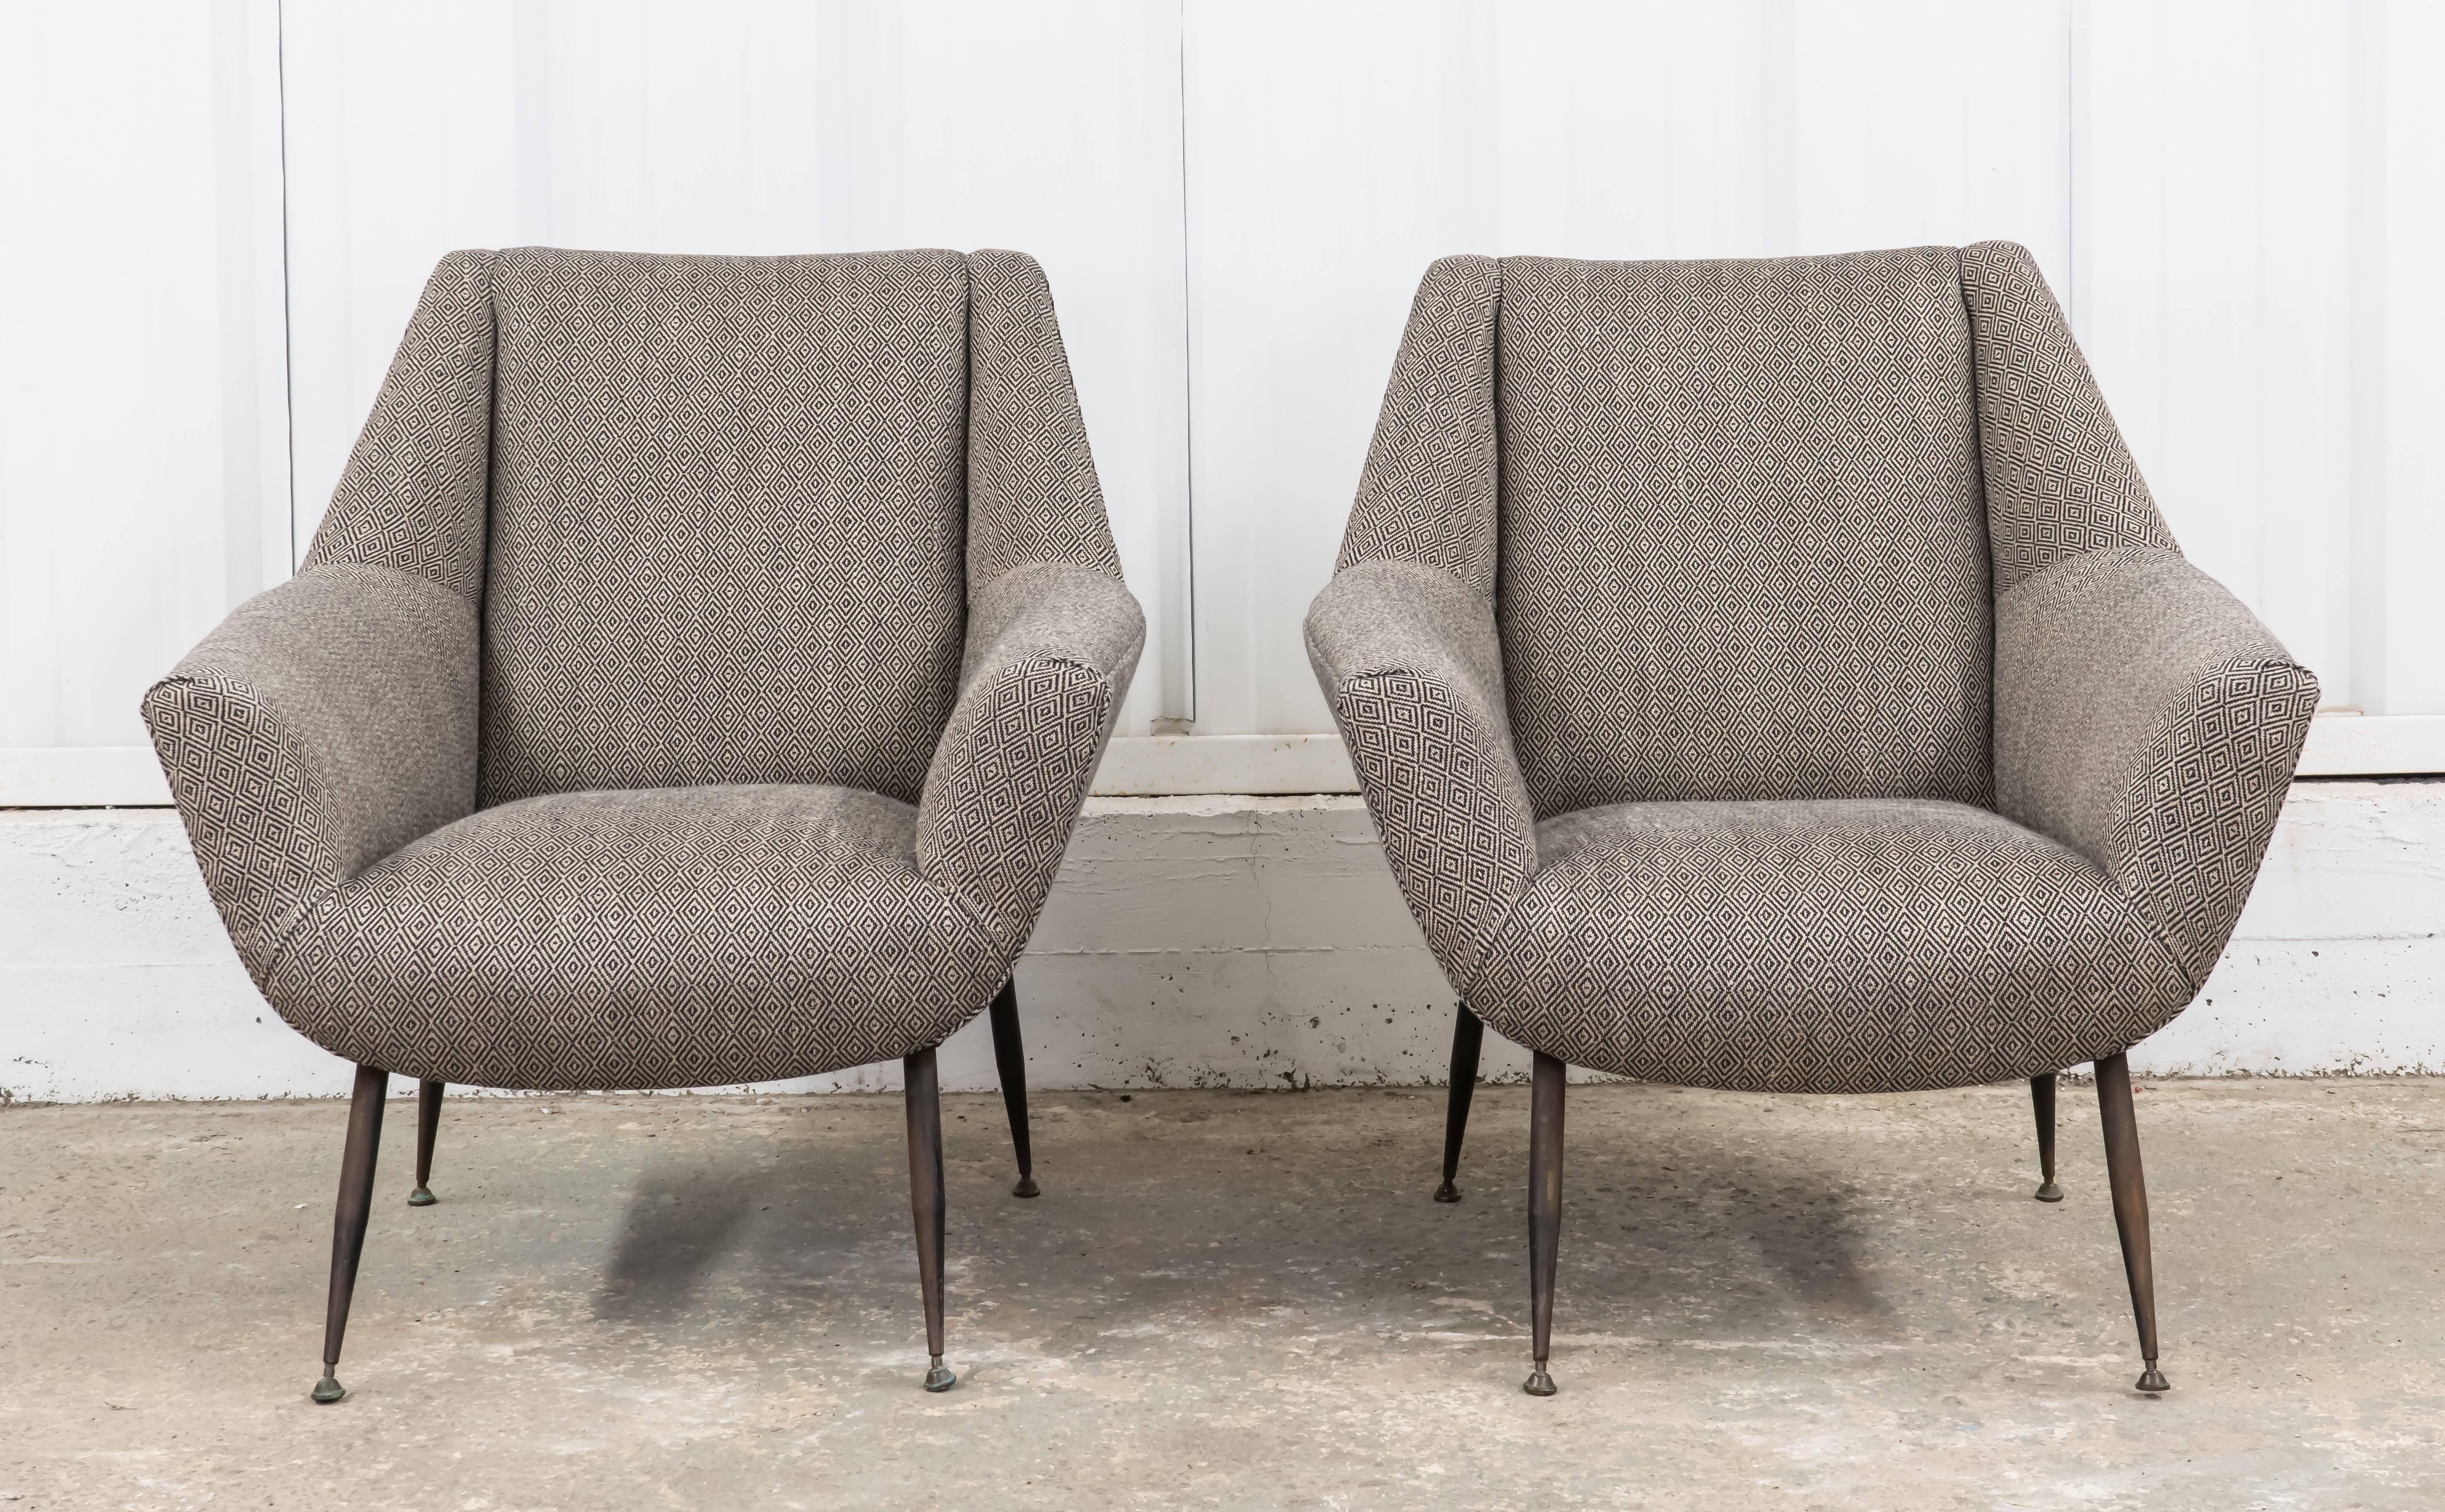 Pair of Italian brass-legged armchairs from the 1950s newly upholstered in Rogers & Goffigon linen/cotton toccata in coal. Fabulous condition!
 